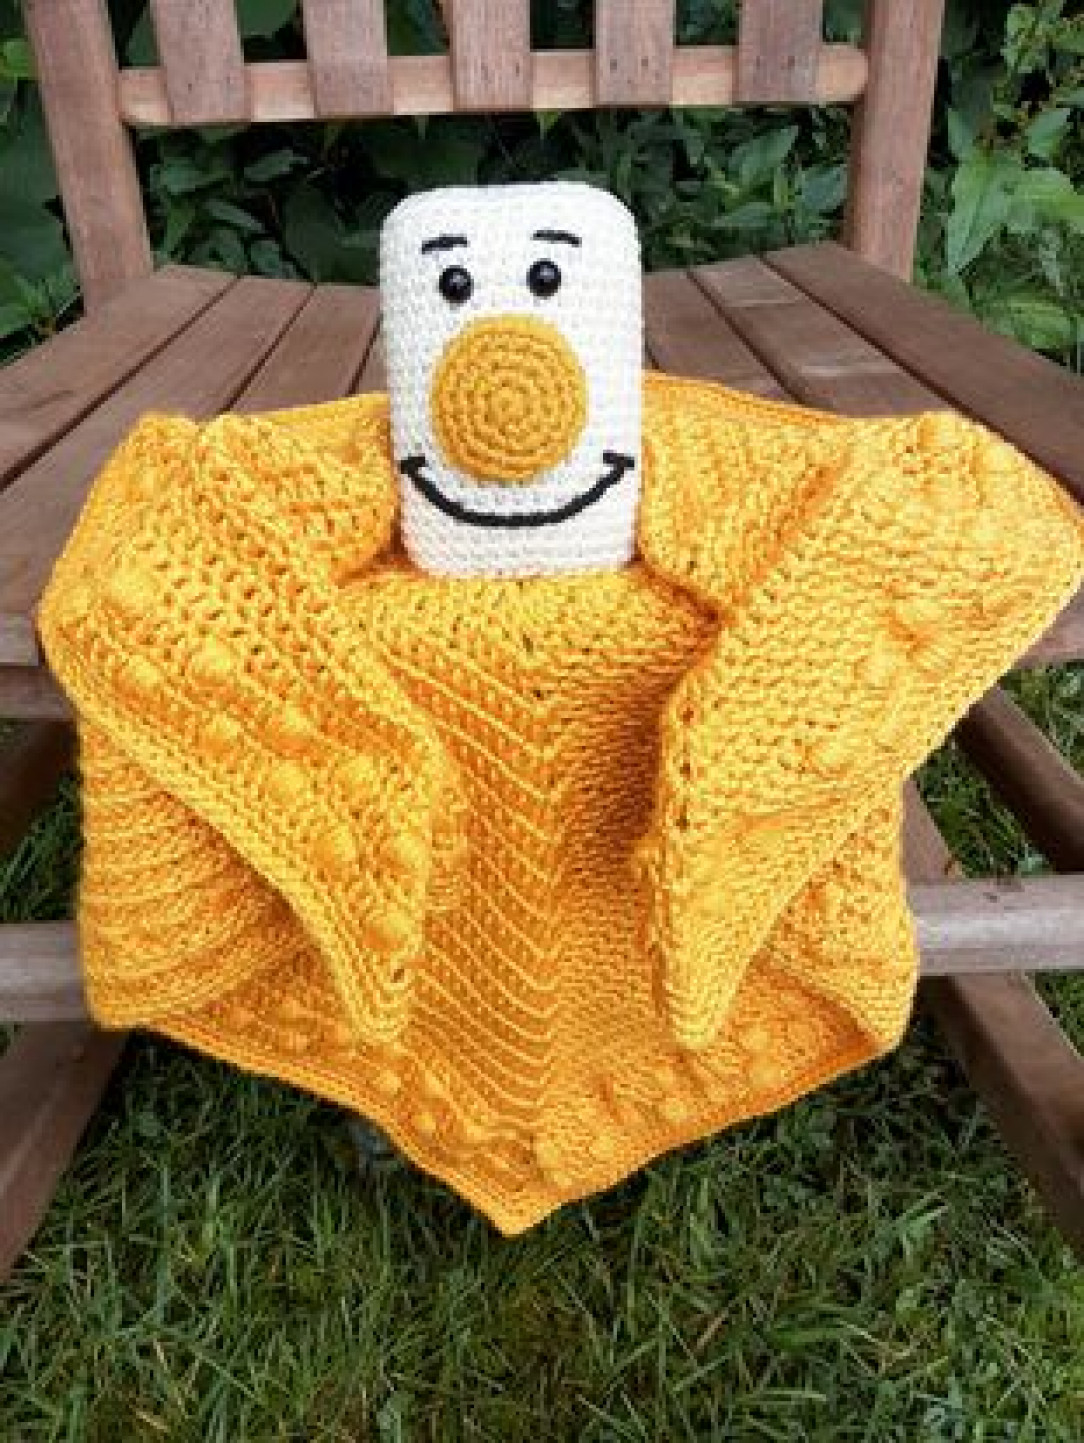 Crochet Blanky inspired by the 1987 movie The Brave Little Toaster